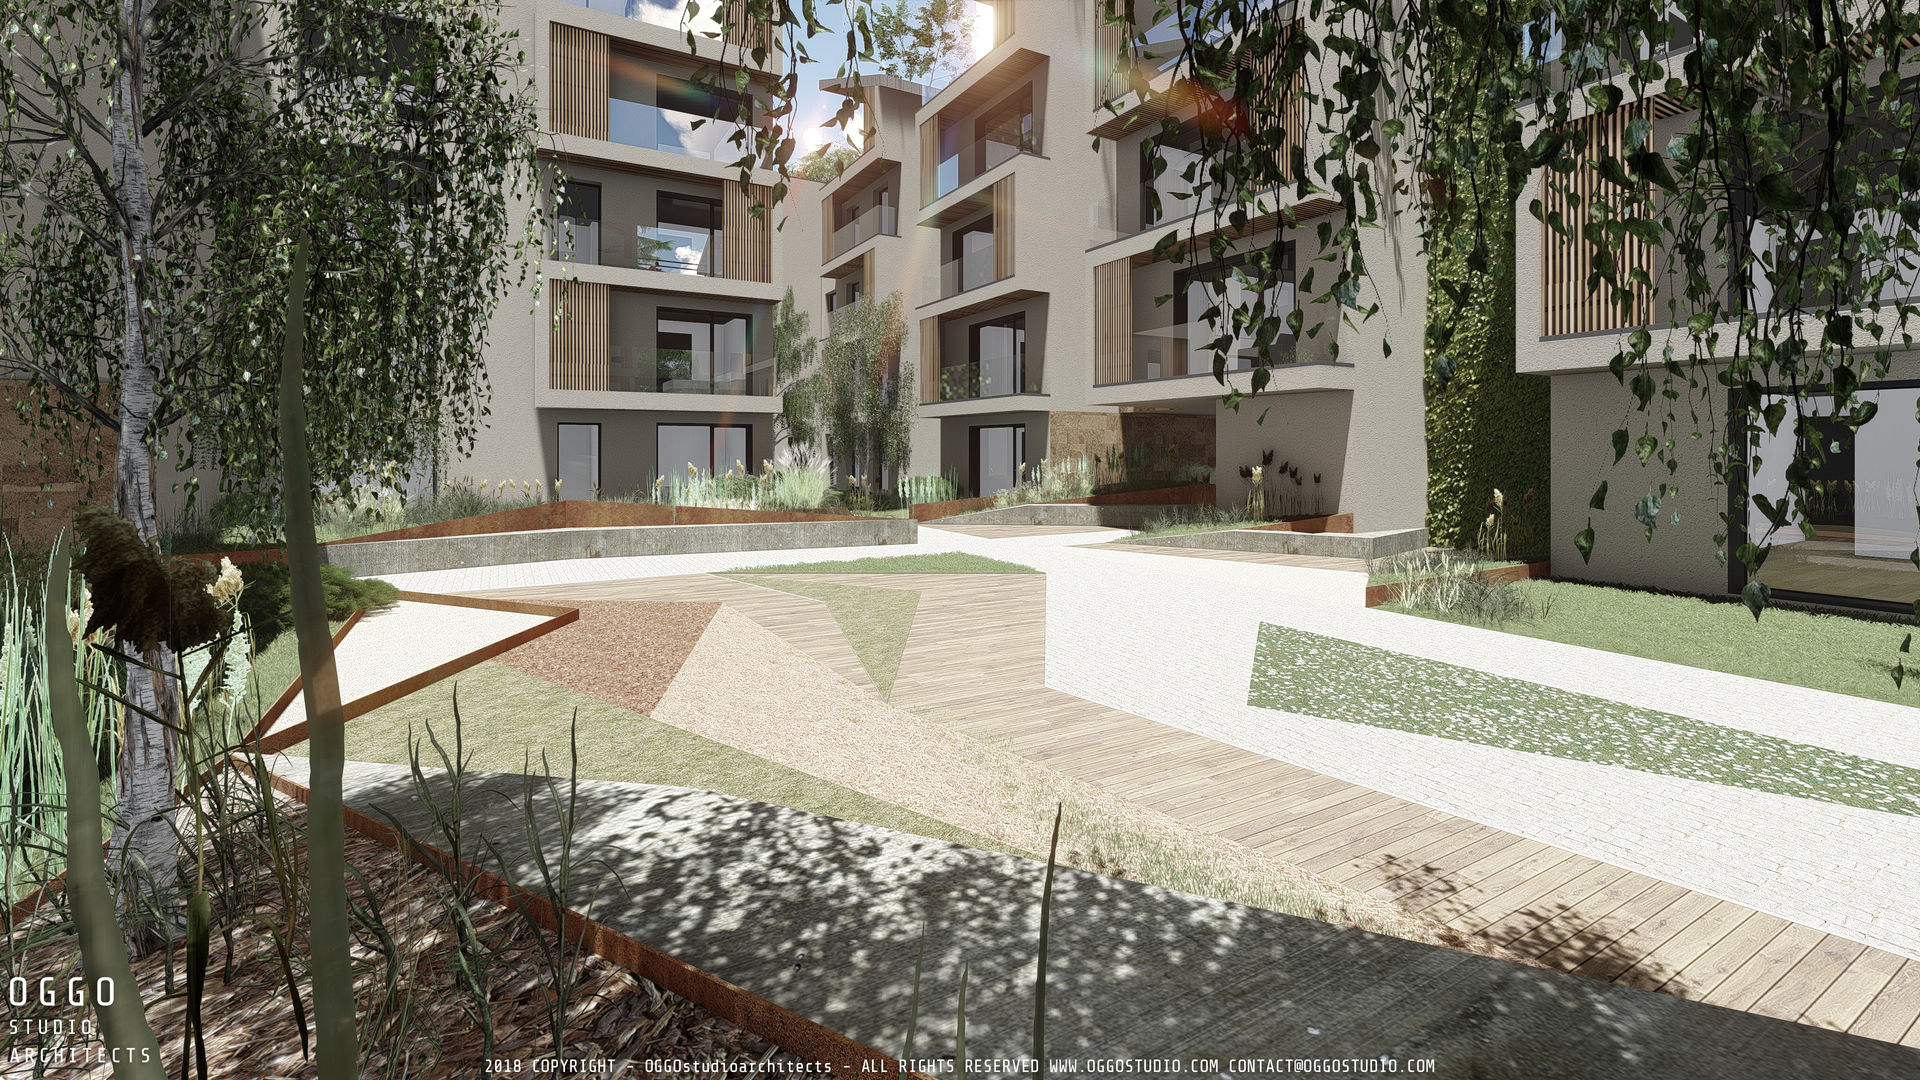 Housing project of 120 apartments OGGOstudioarchitects, unipessoal lda Jardines modernos: Ideas, imágenes y decoración Romainville,Collective housing,square,green,wood